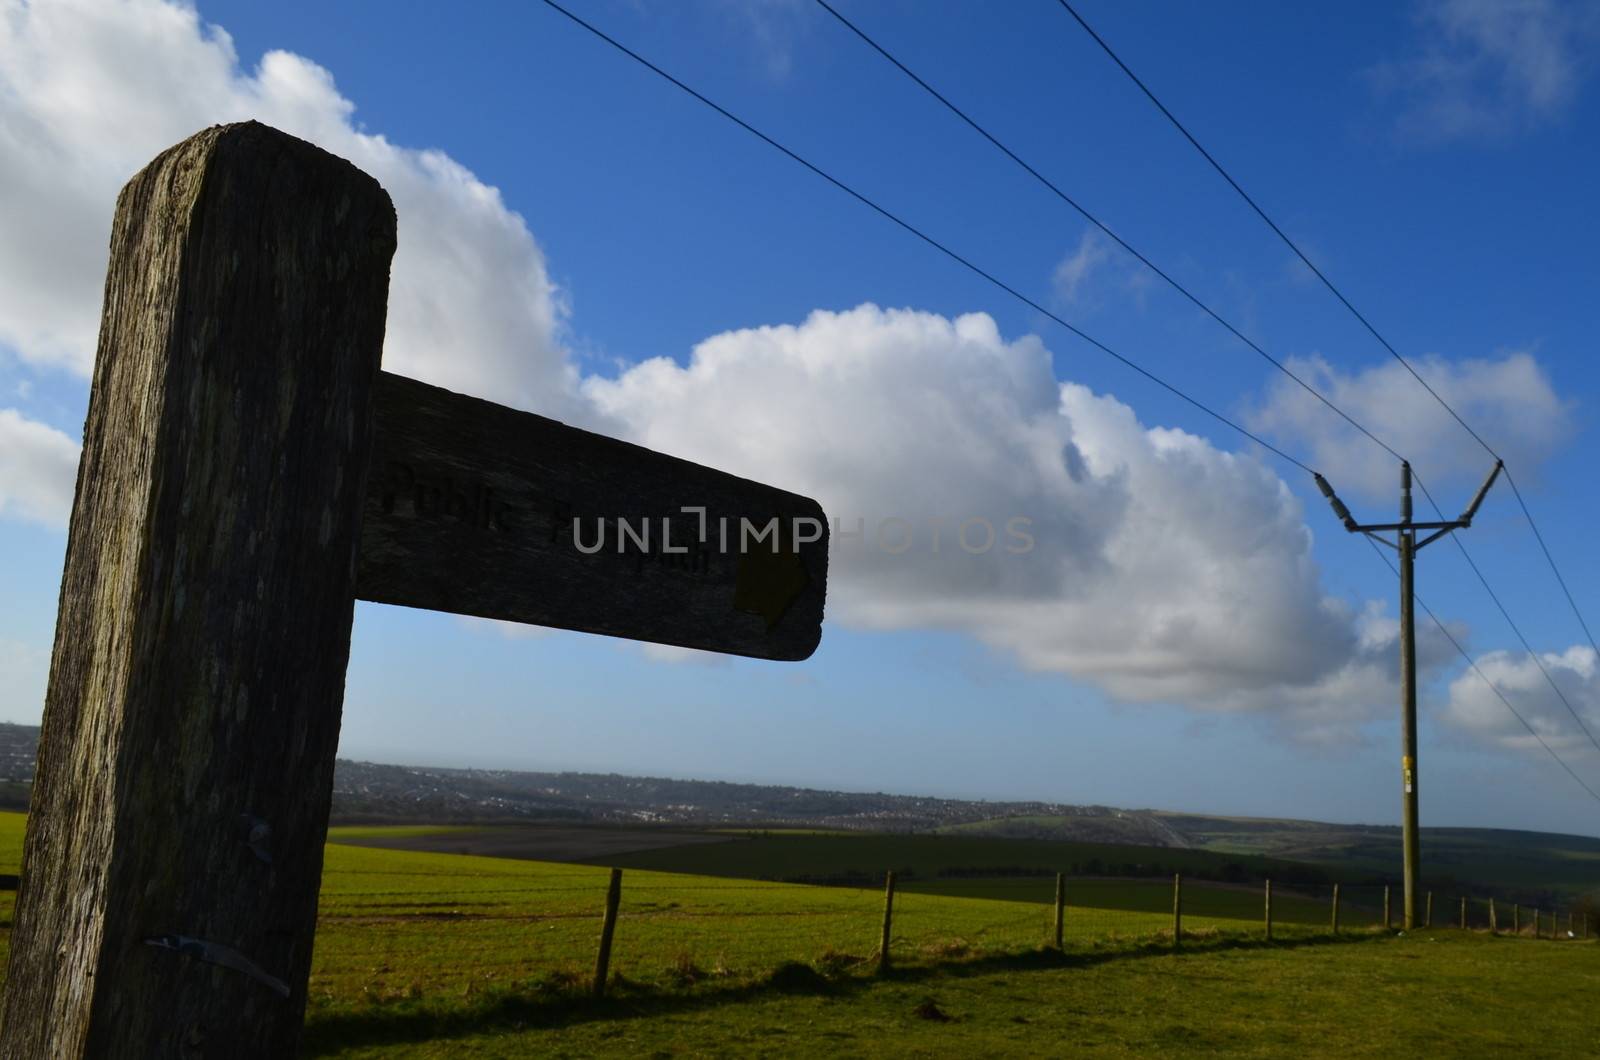 Public footpath sign. by bunsview